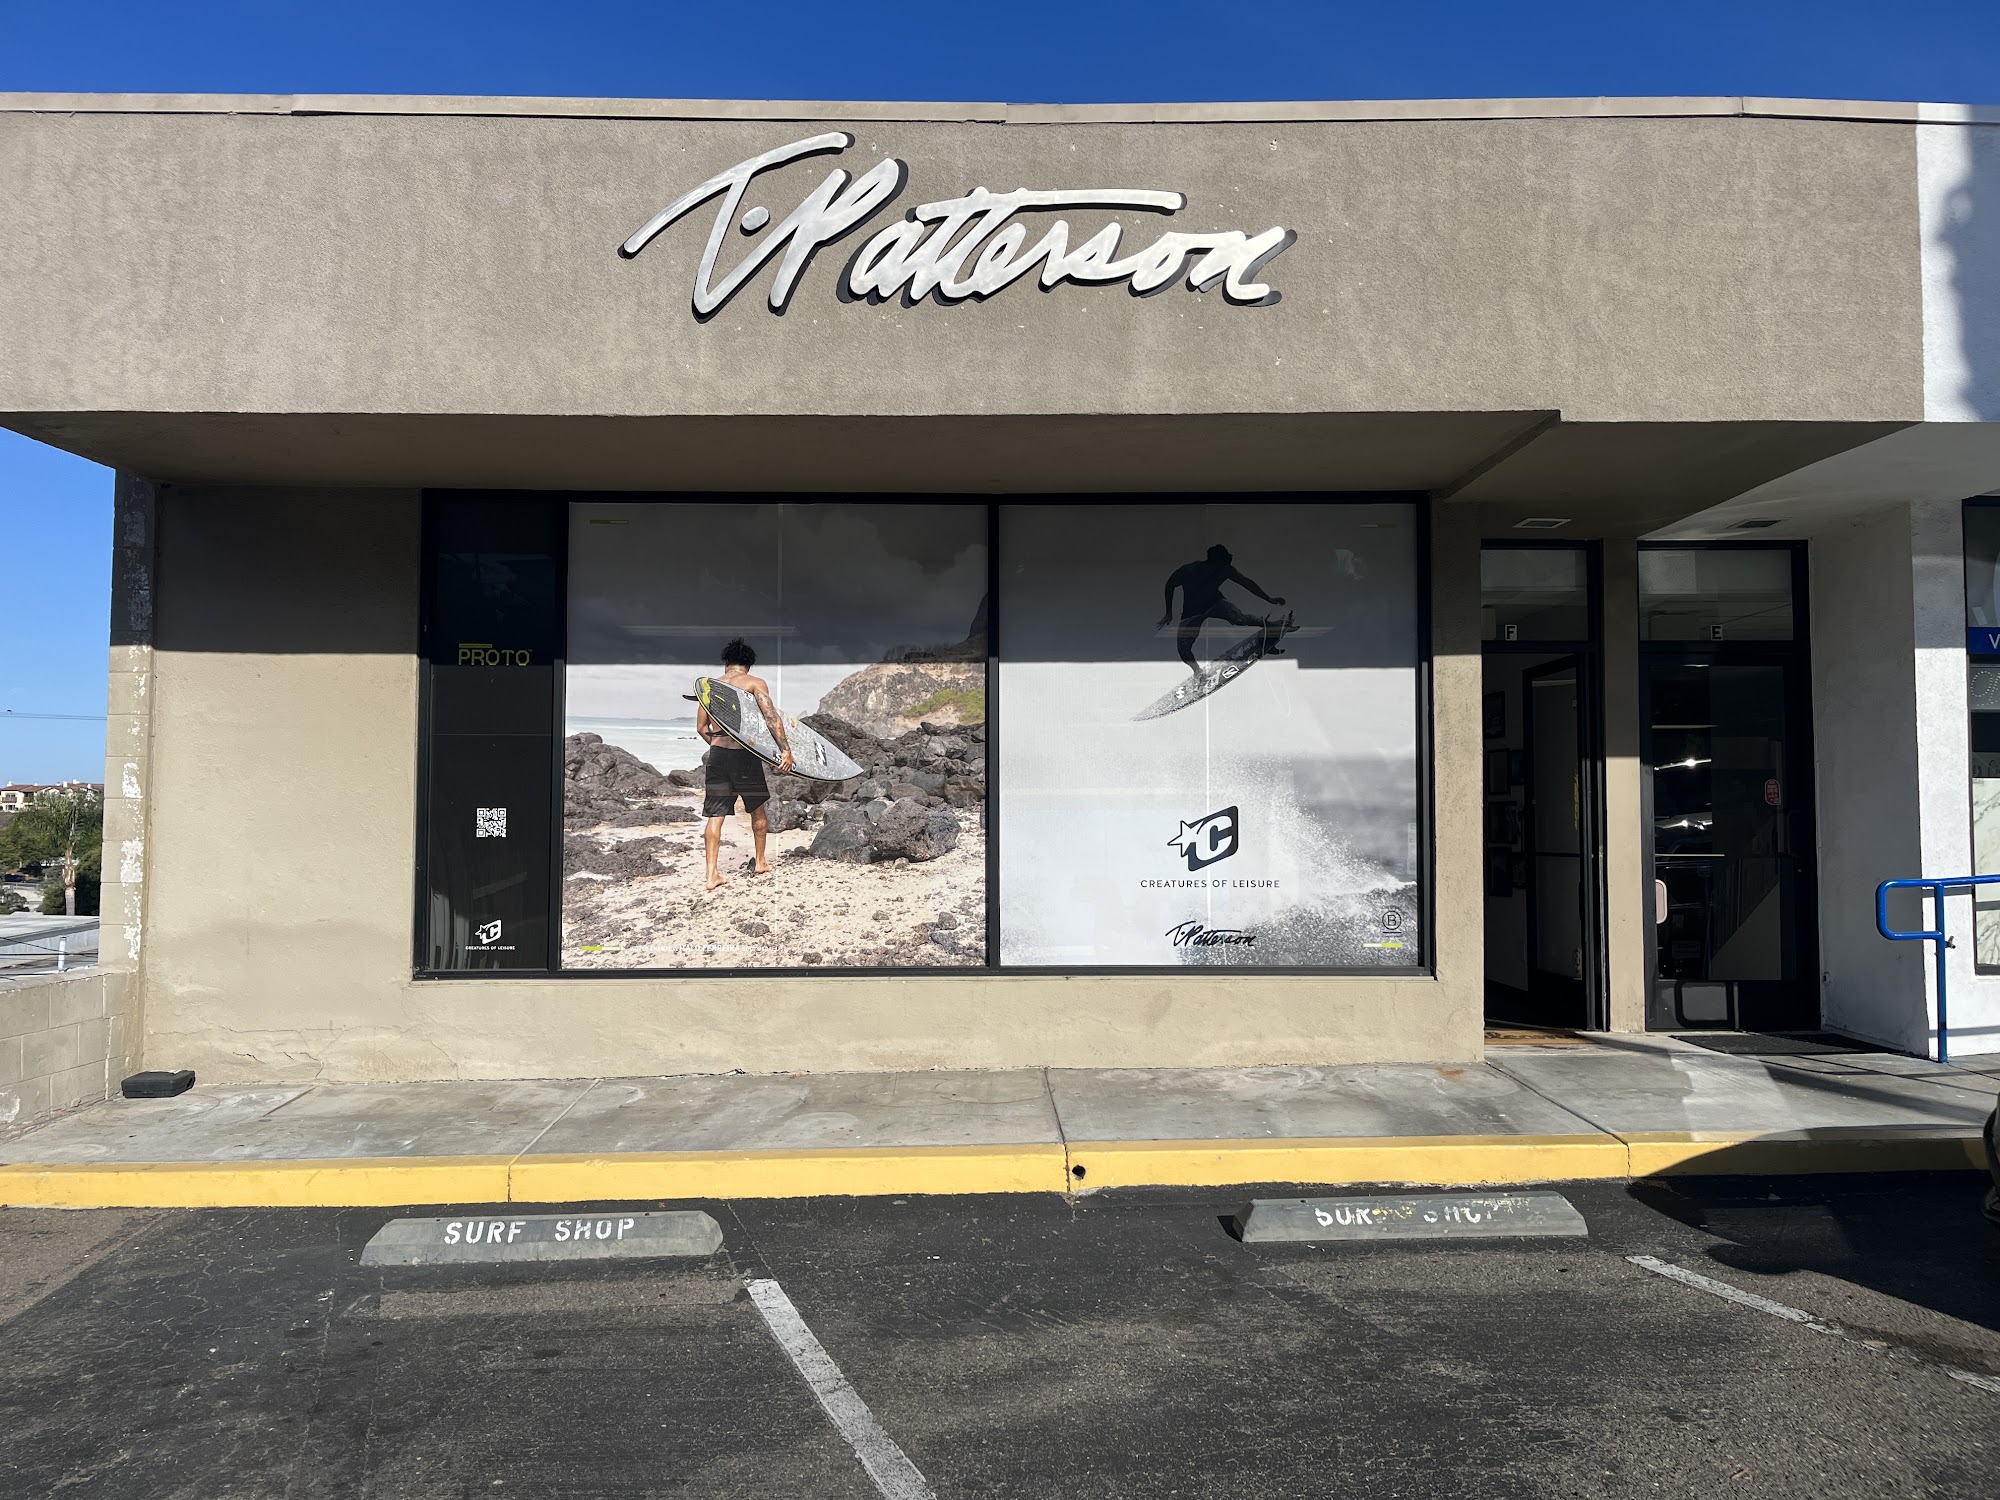 T Patterson Surfboards